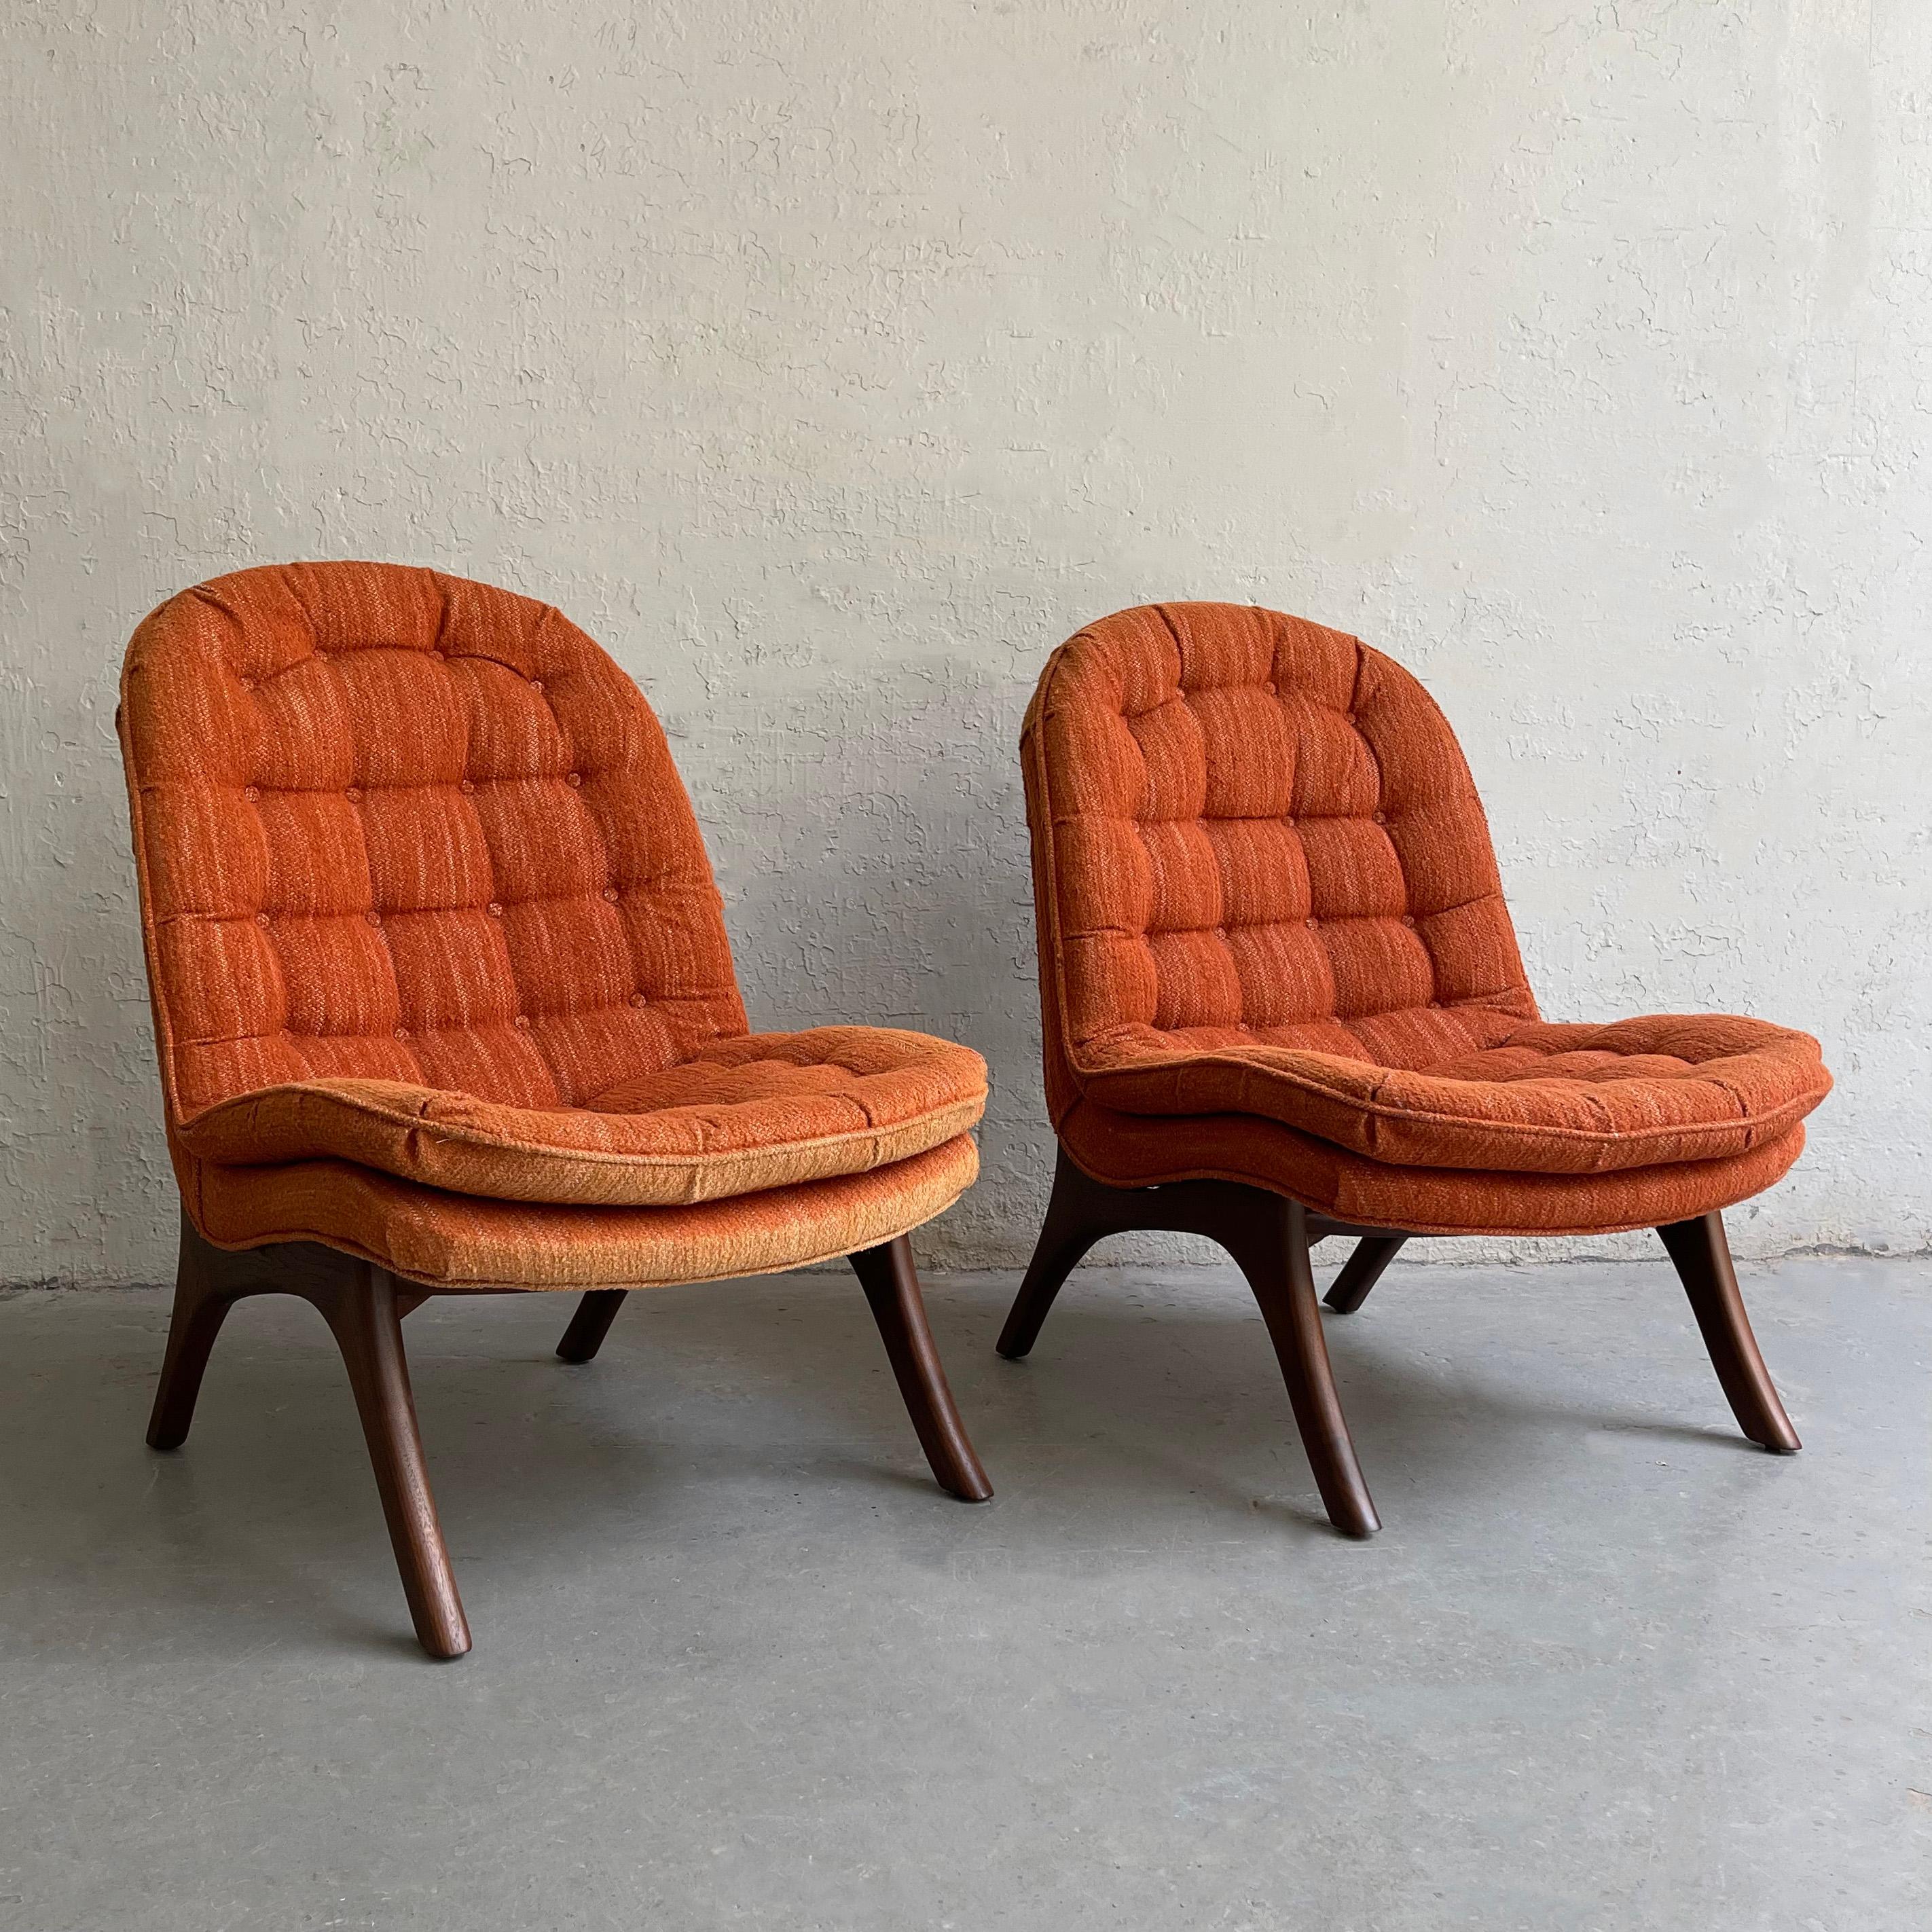 Pair of fantastic, Mid-Century Modern, slipper, lounge chairs by Adrian Pearsall for Craft Associates features fully upholstered frames with attached tufted seats and backs in tangerine chenille with sculptural walnut legs. They are striking chairs